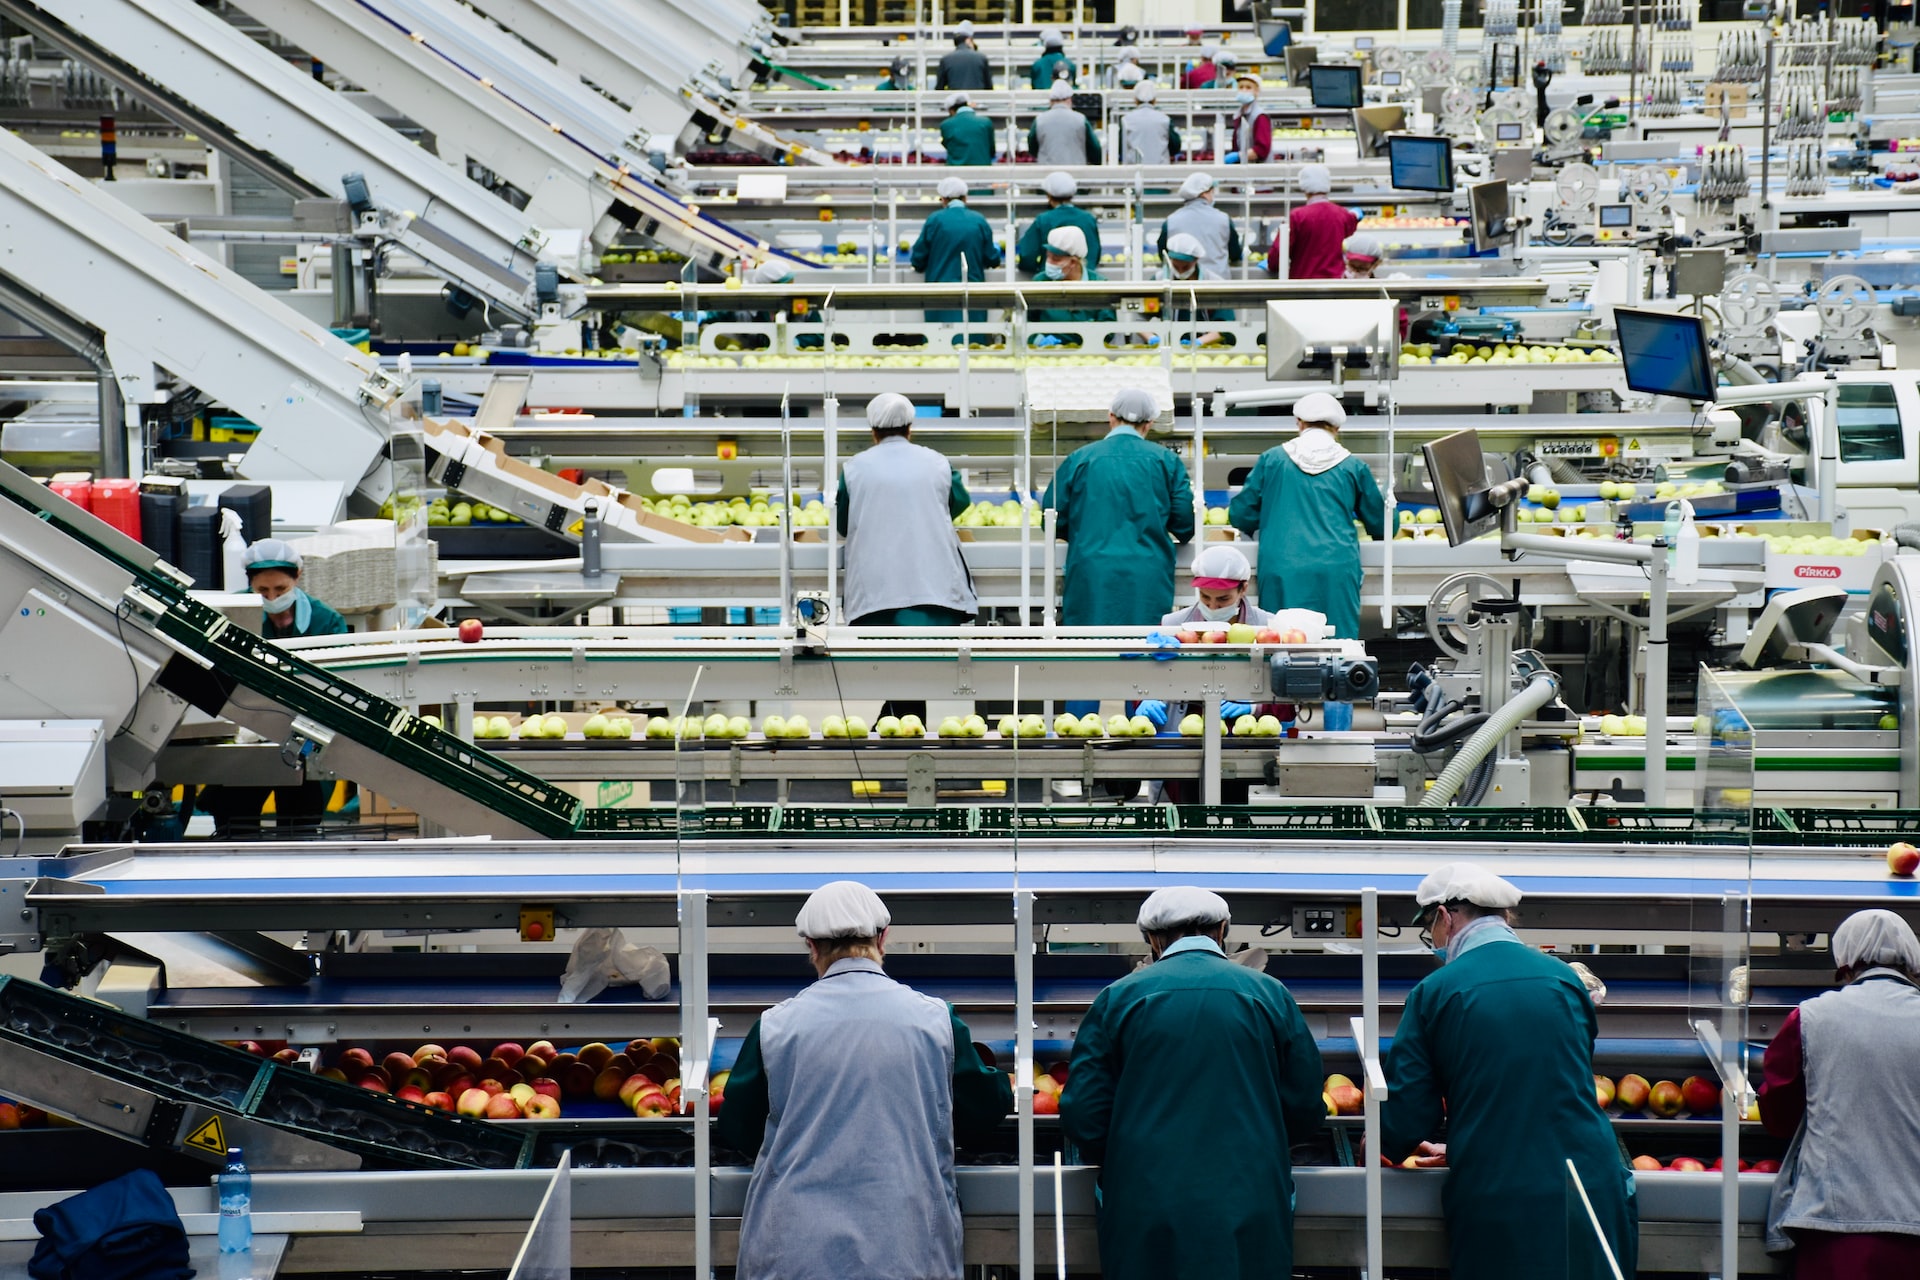 Conveyor belts inside an apple processing plant in northern Italy.